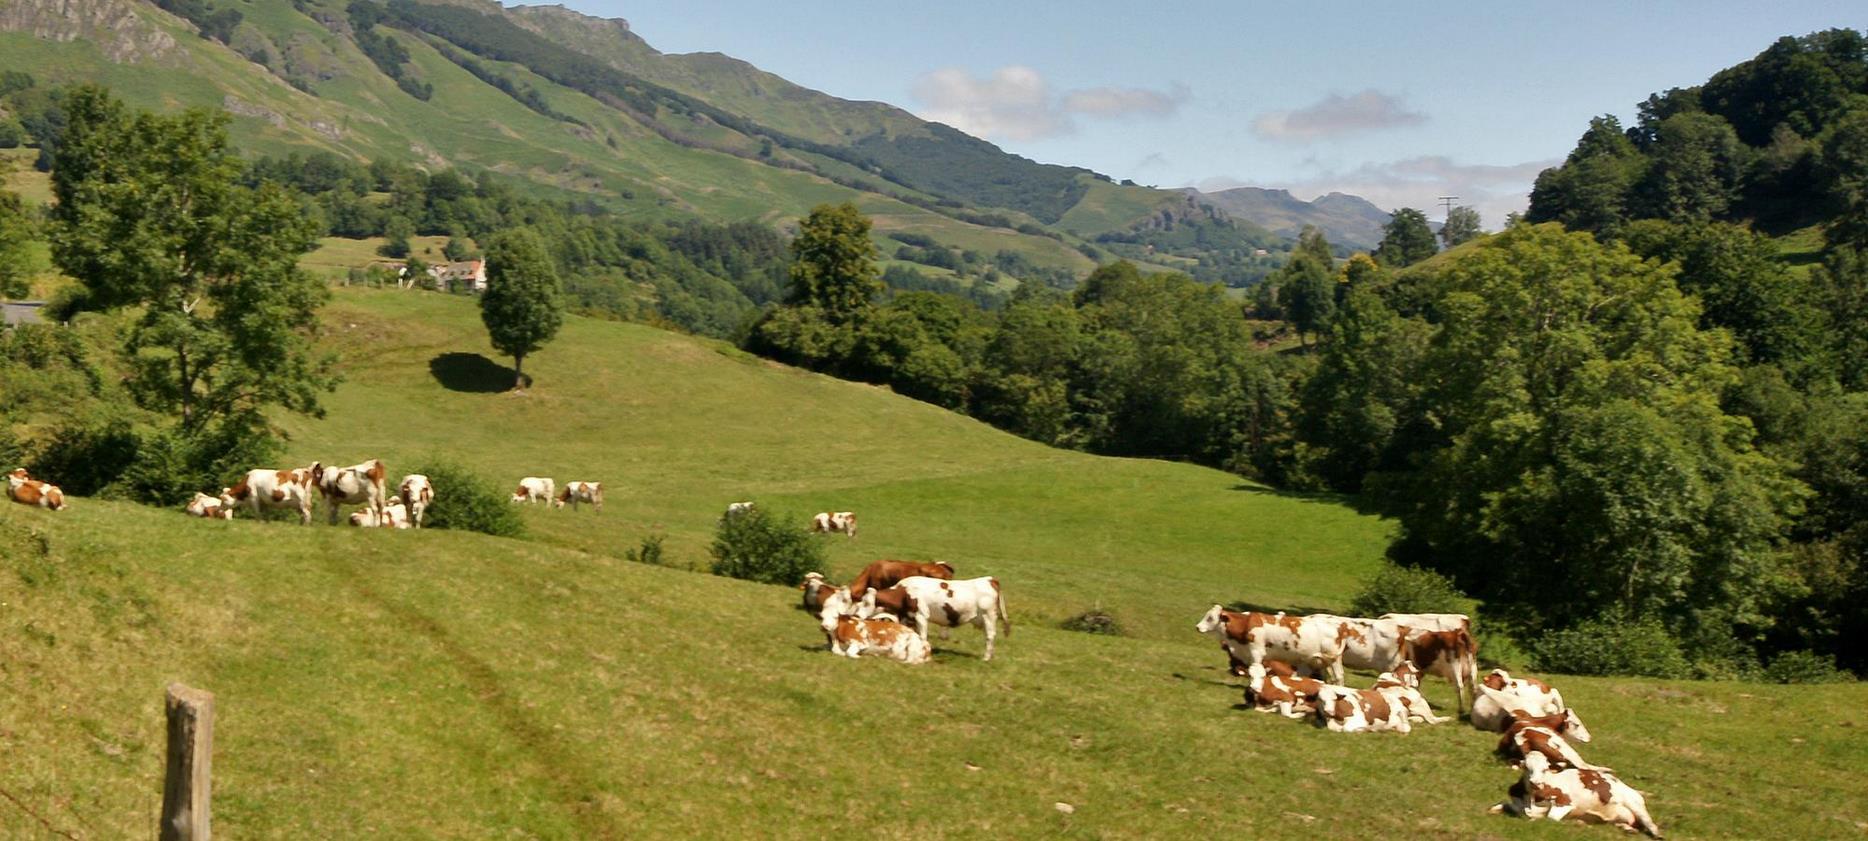 Herd of cows in the mountain pastures